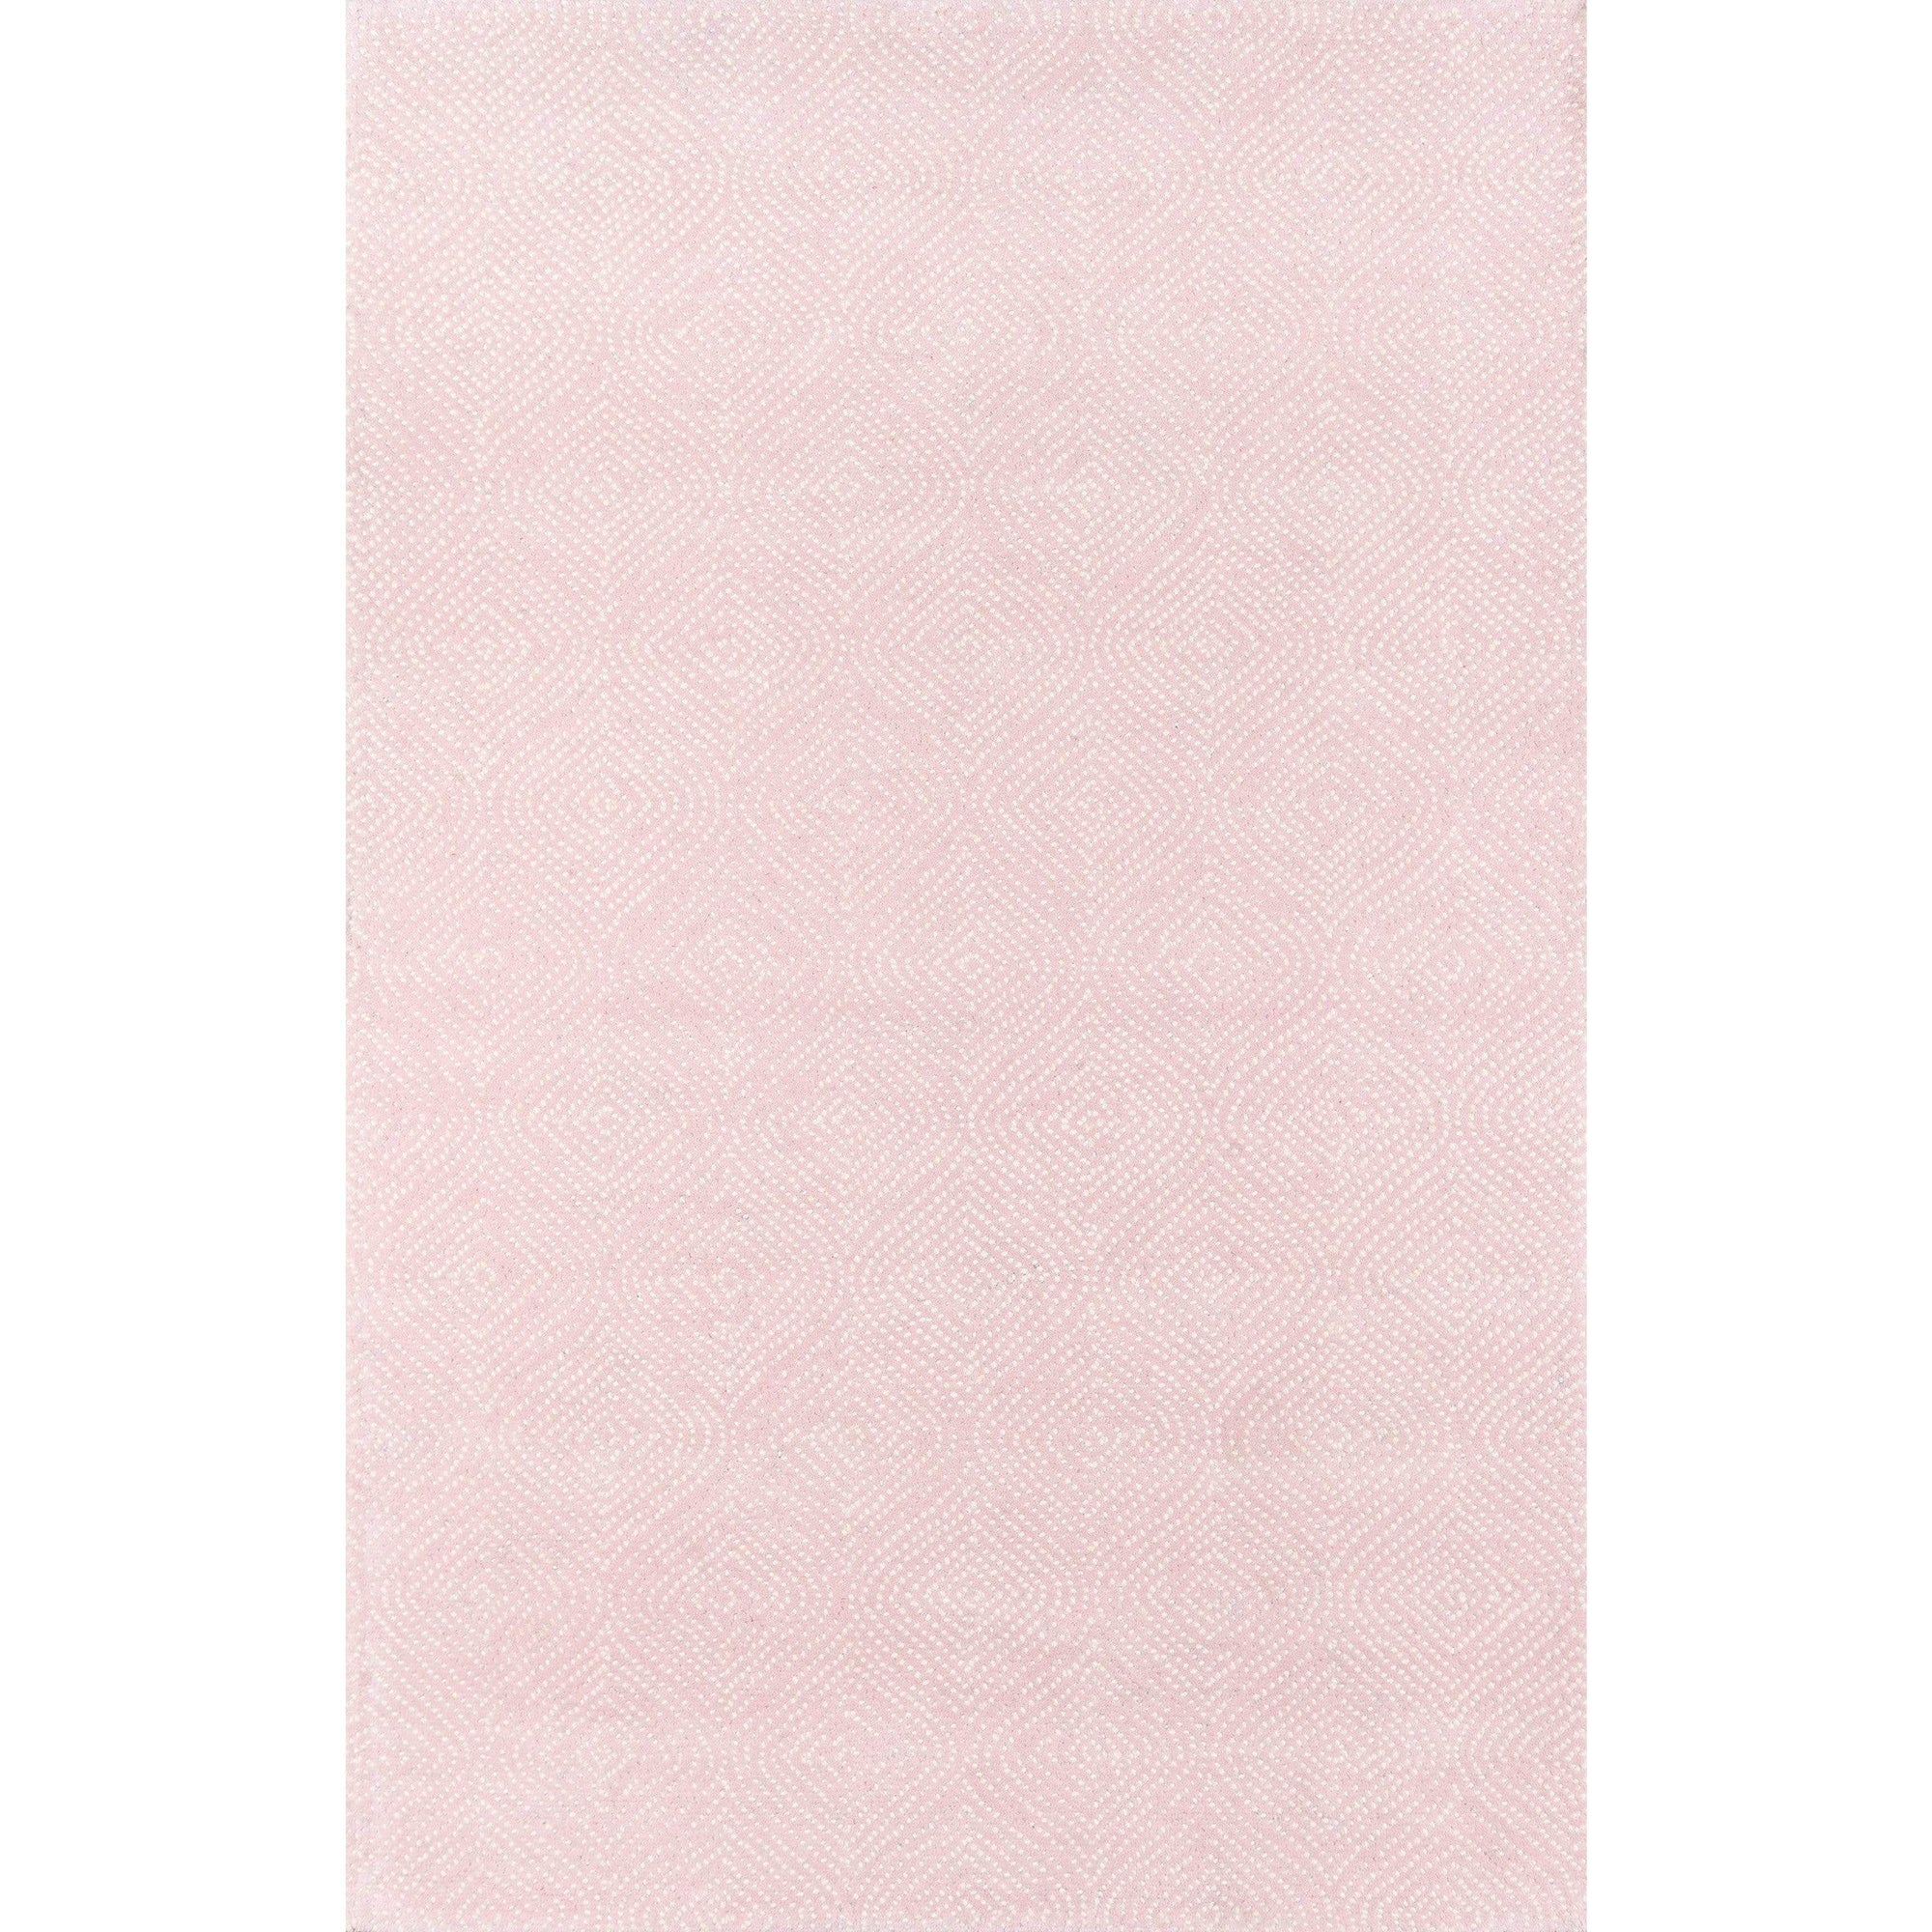 Rugs by Roo | Momeni Roman Holiday Via del Corso Pink Area Rug-ROMNHROH-1PNK2030